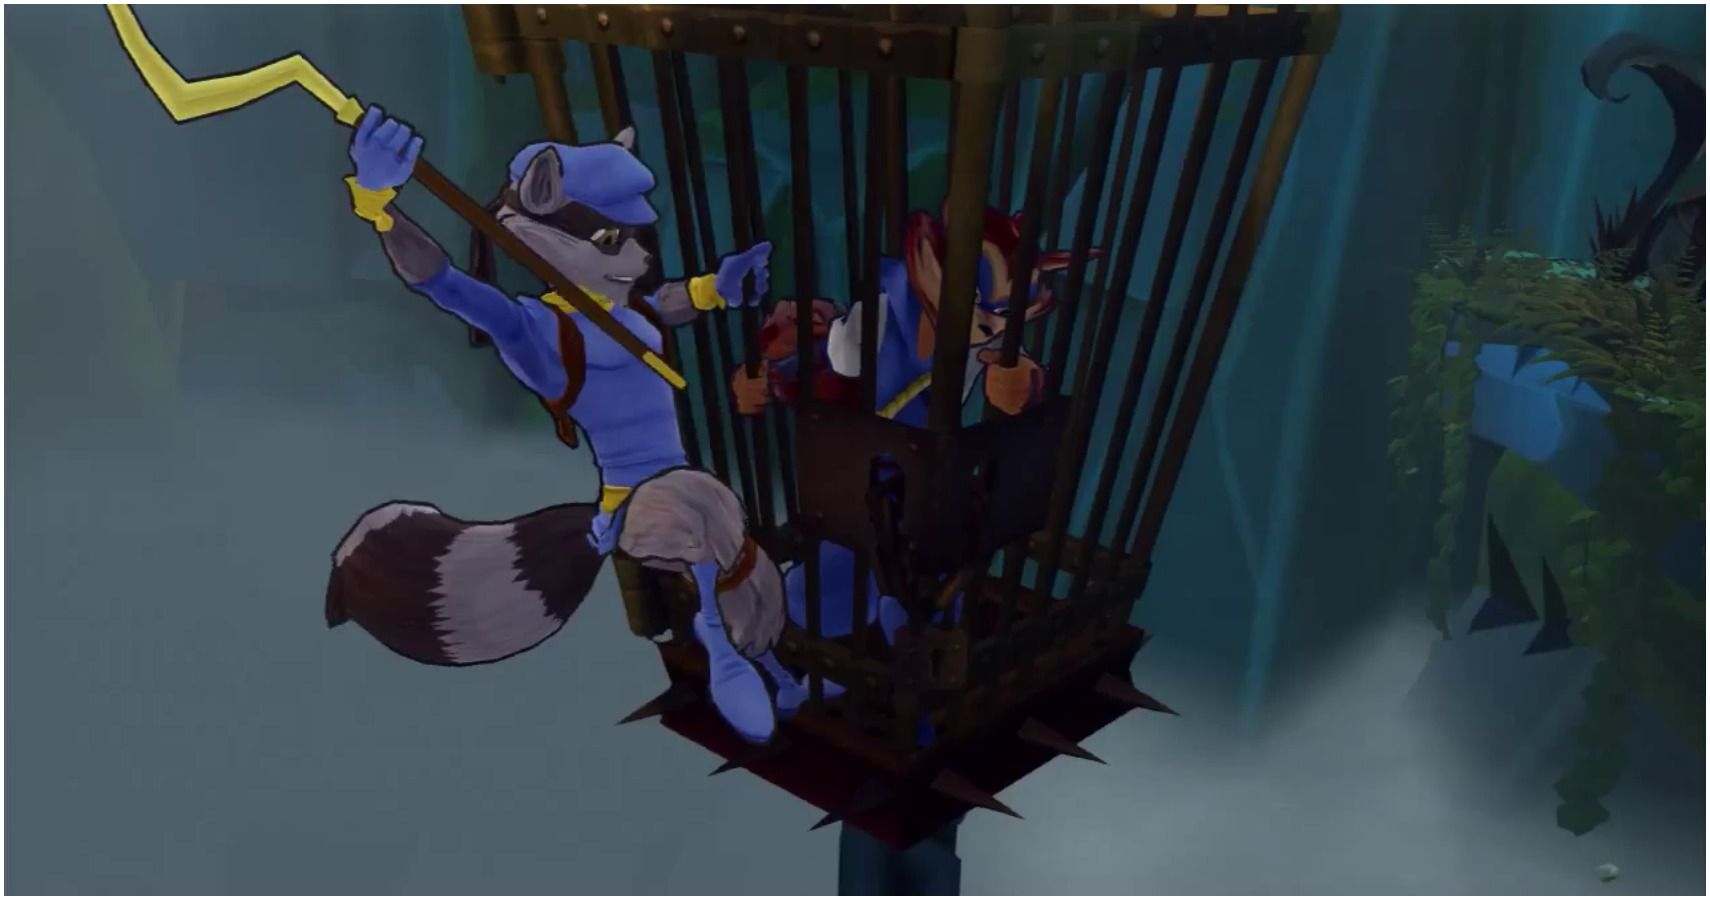 Sanzaru  Sly Cooper Thieves In Time